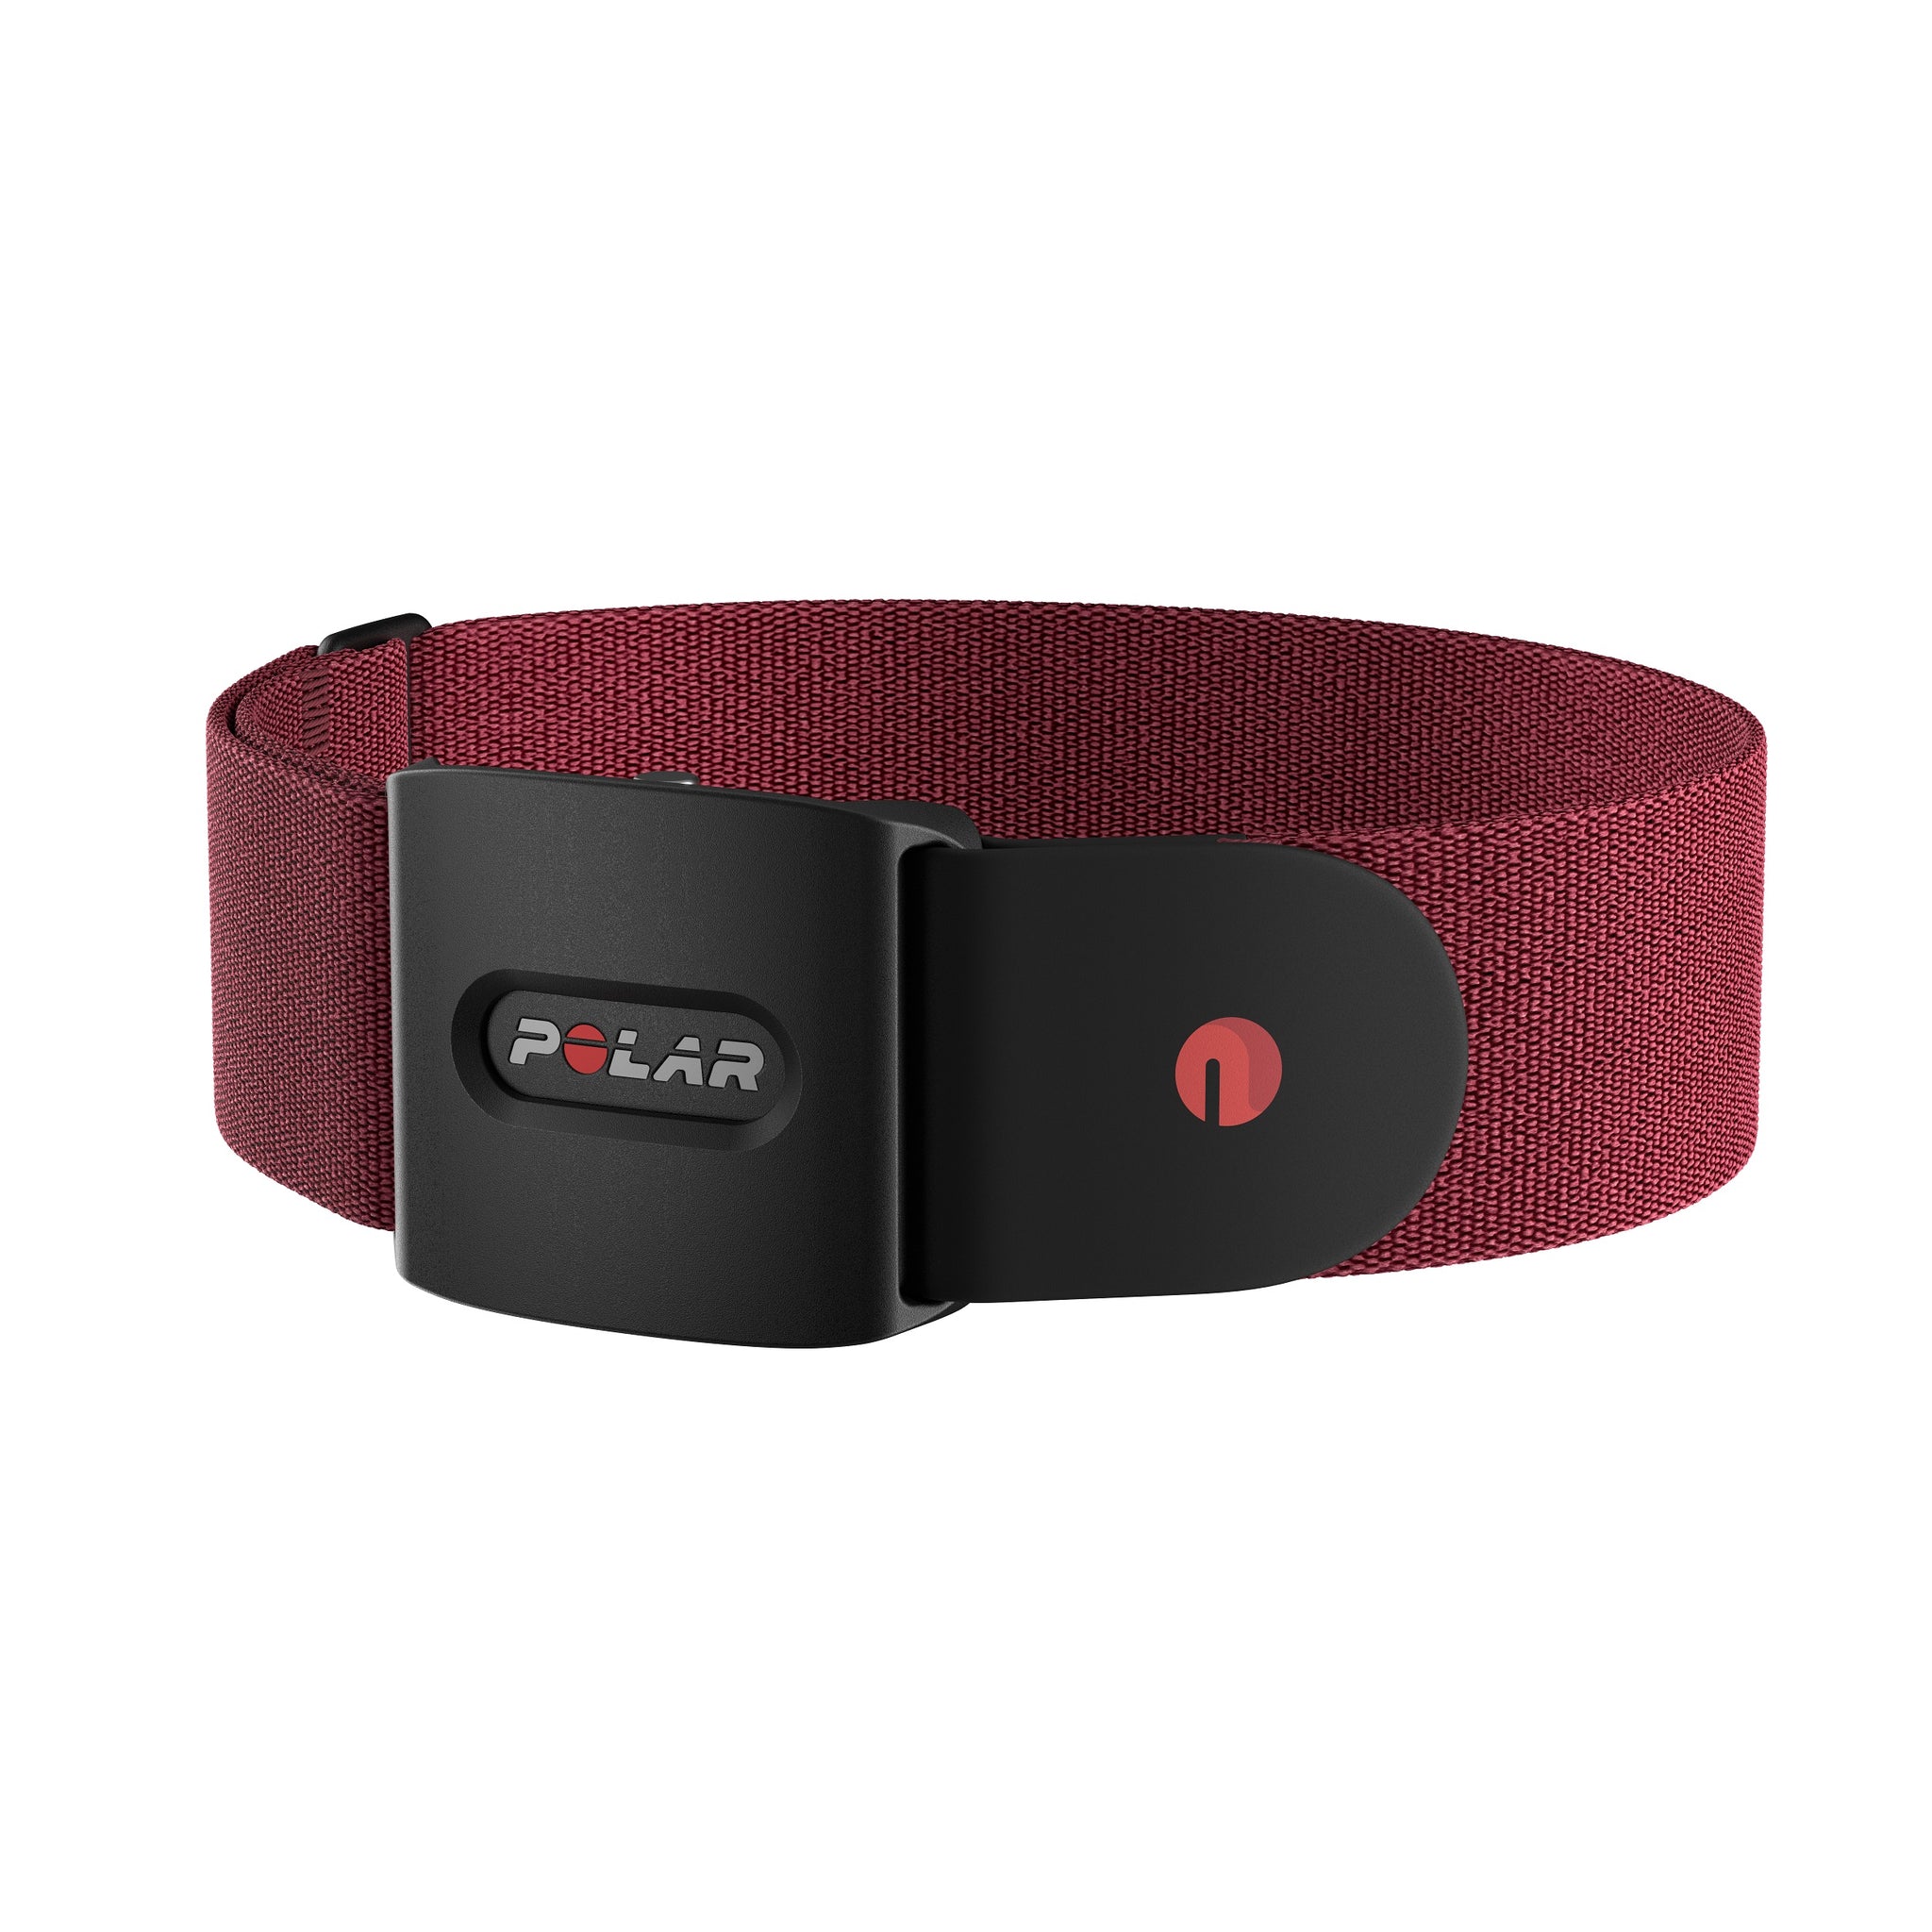 Polar Verity Sense optical heart rate monitor tracks how hard you work out  » Gadget Flow